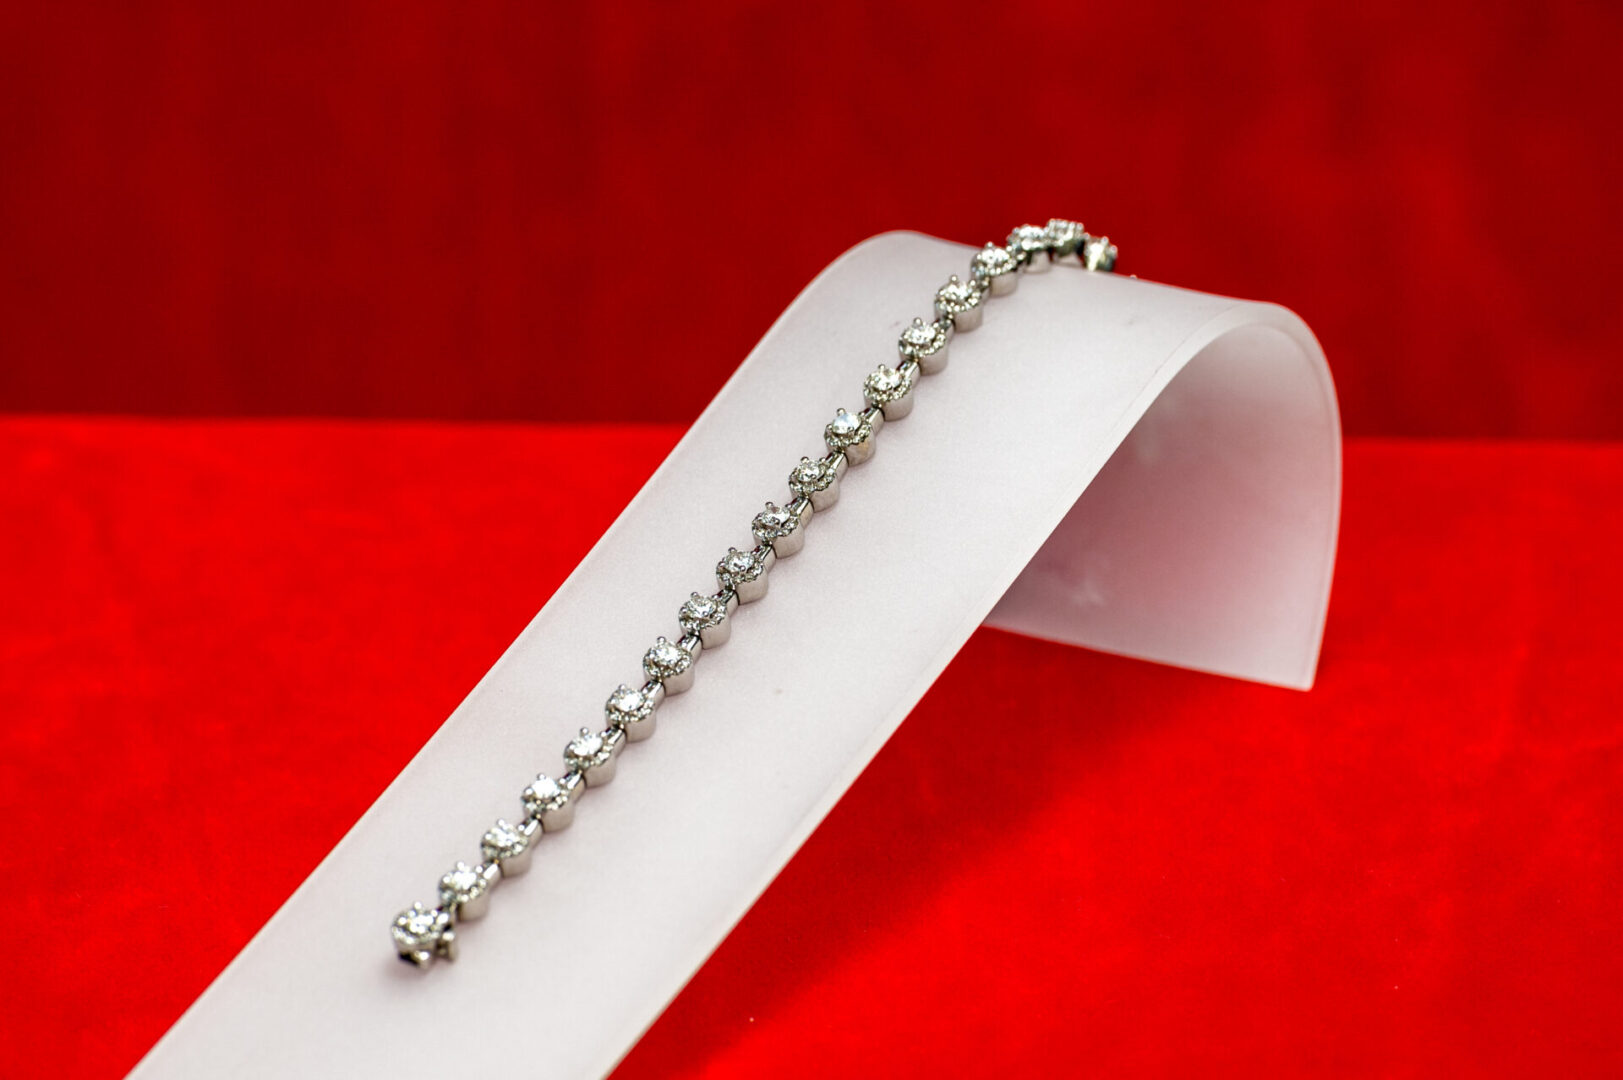 A white bracelet is on top of a red table.